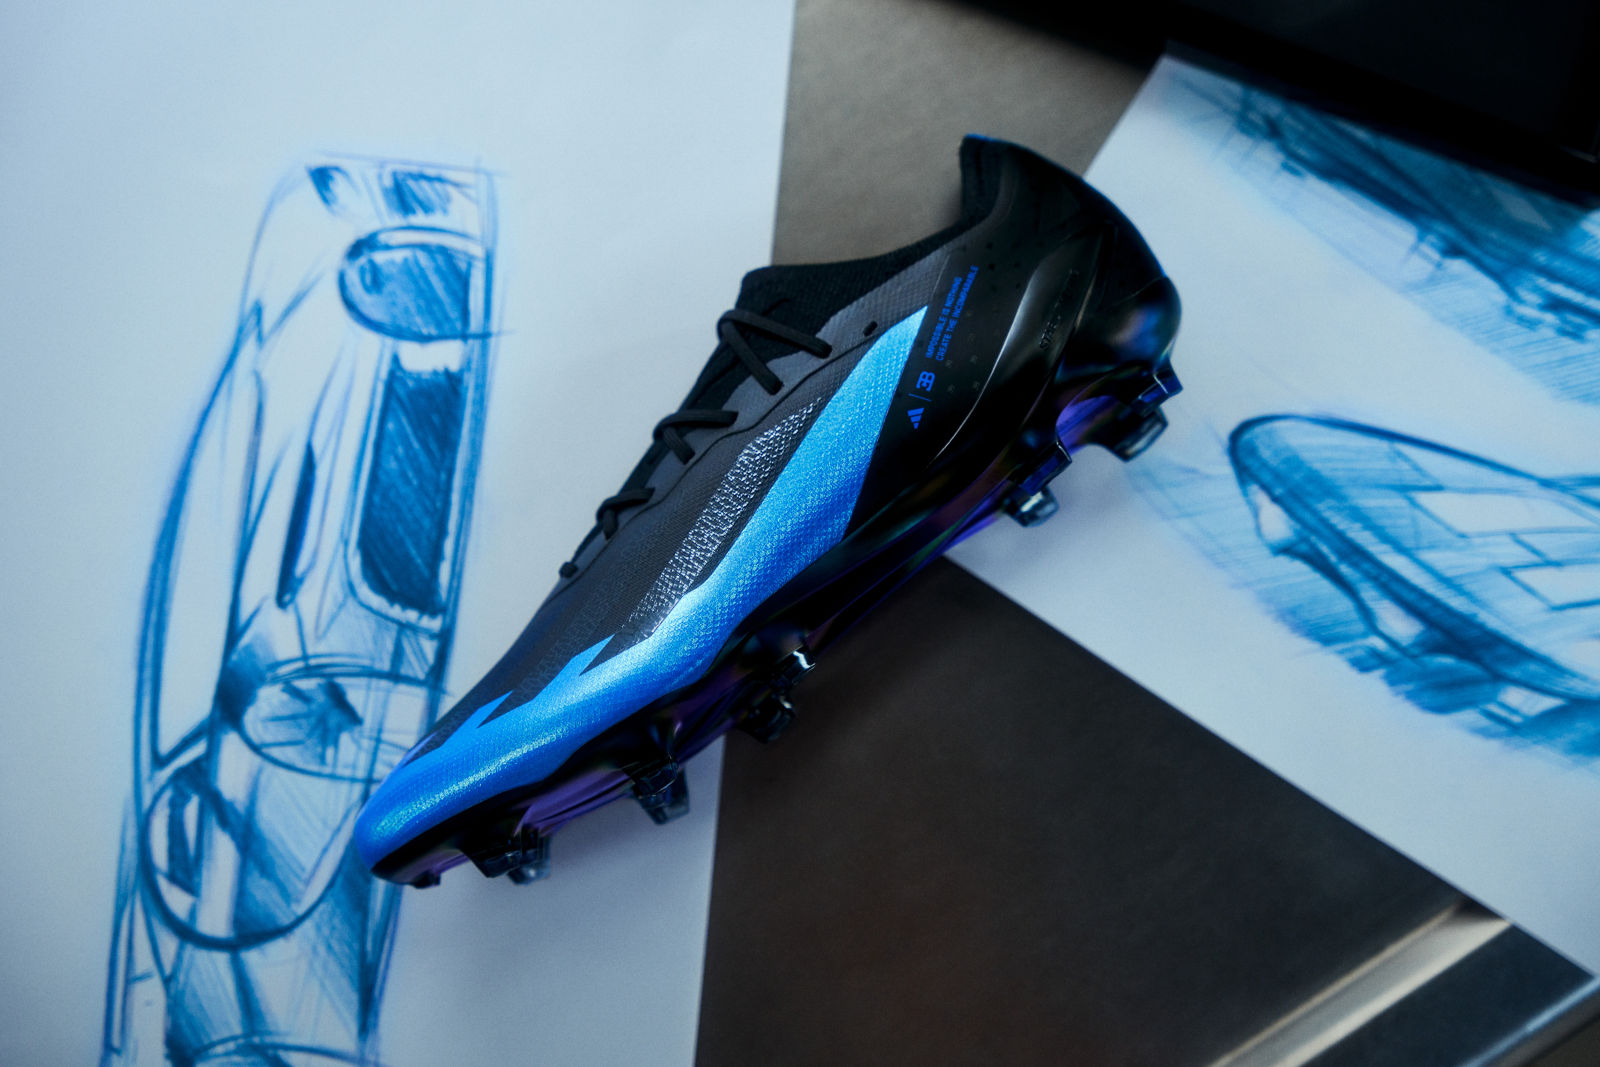 bugatti and adidas unveil limited-edition football boots